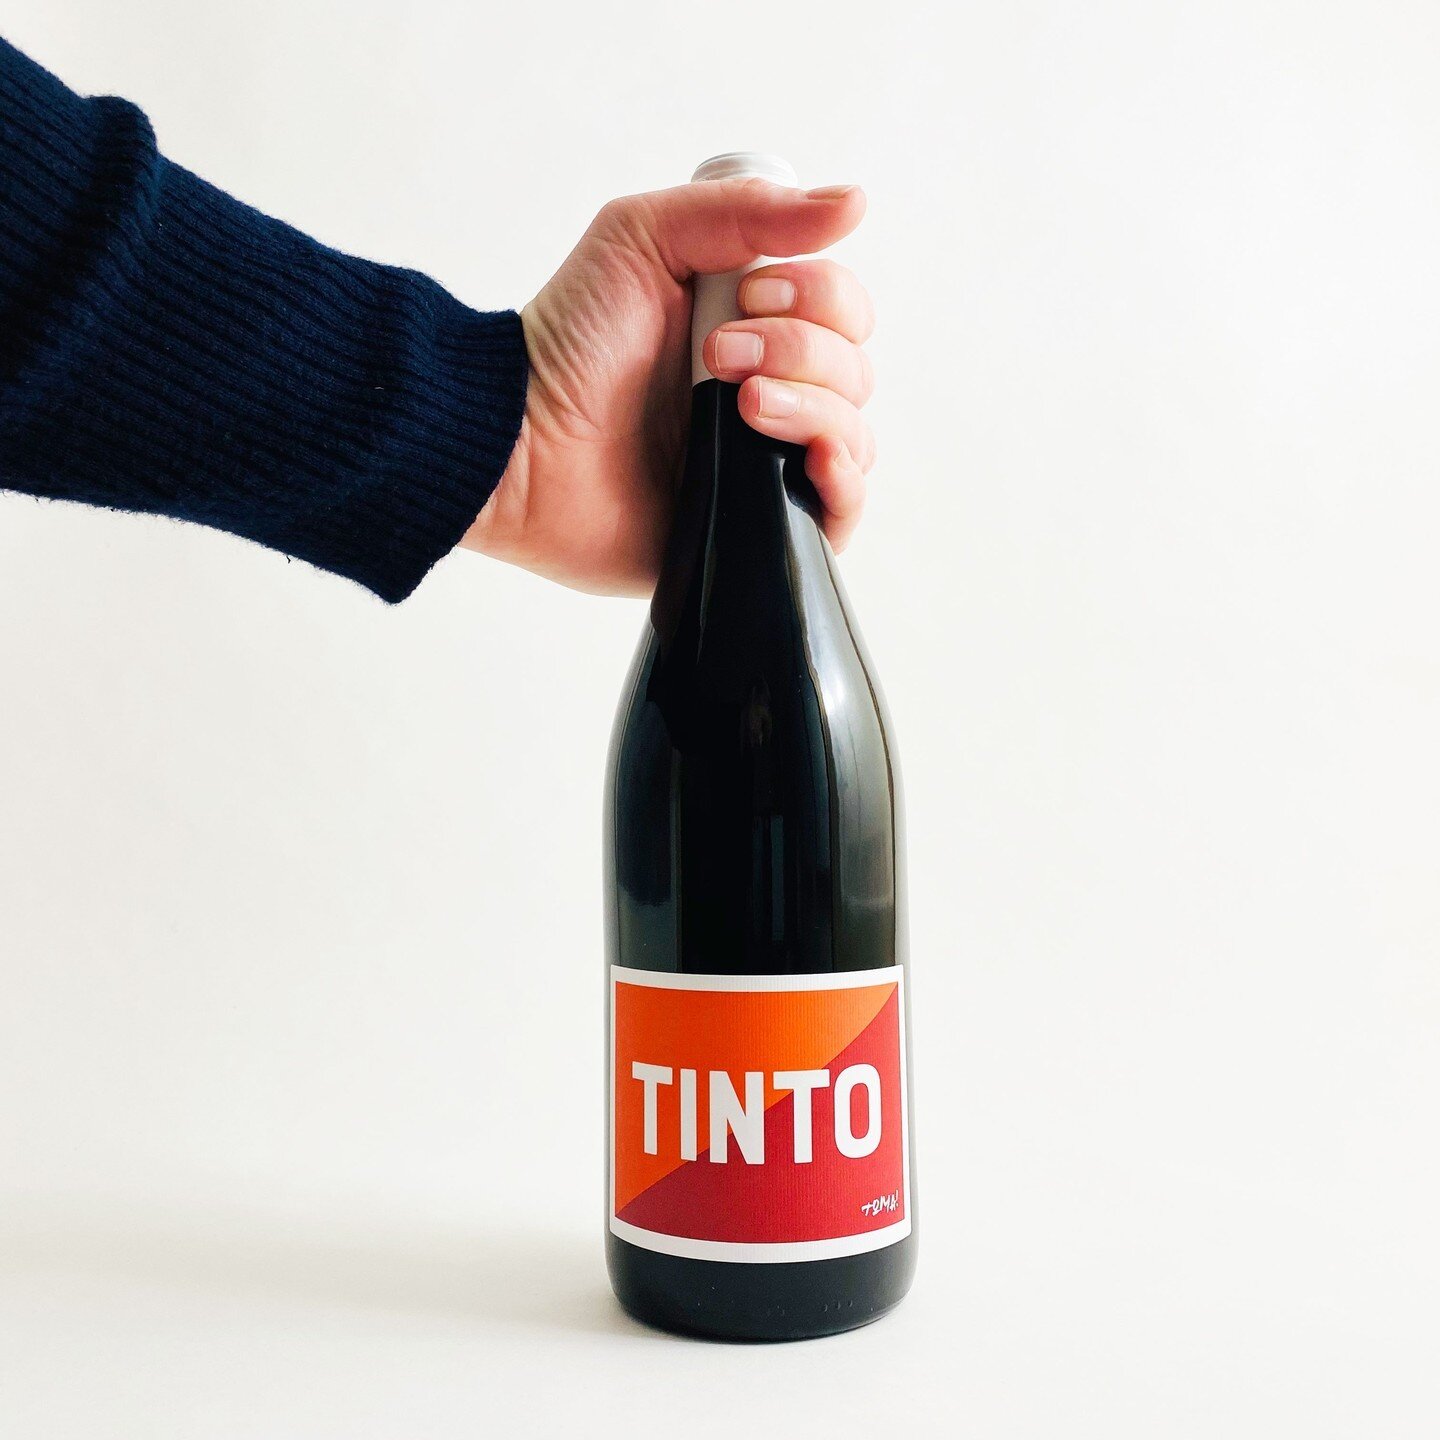 ❤️ New Vintage Toma 'Tinto' Tempranillo / Grenache has landed ❤️⁠
⁠
The 2020 vintage is absolutely singing! With Tempranillo and Grenache in equal parts, we stand by this as one of the best red wines we've ever seen for the $. Get in touch to get on 